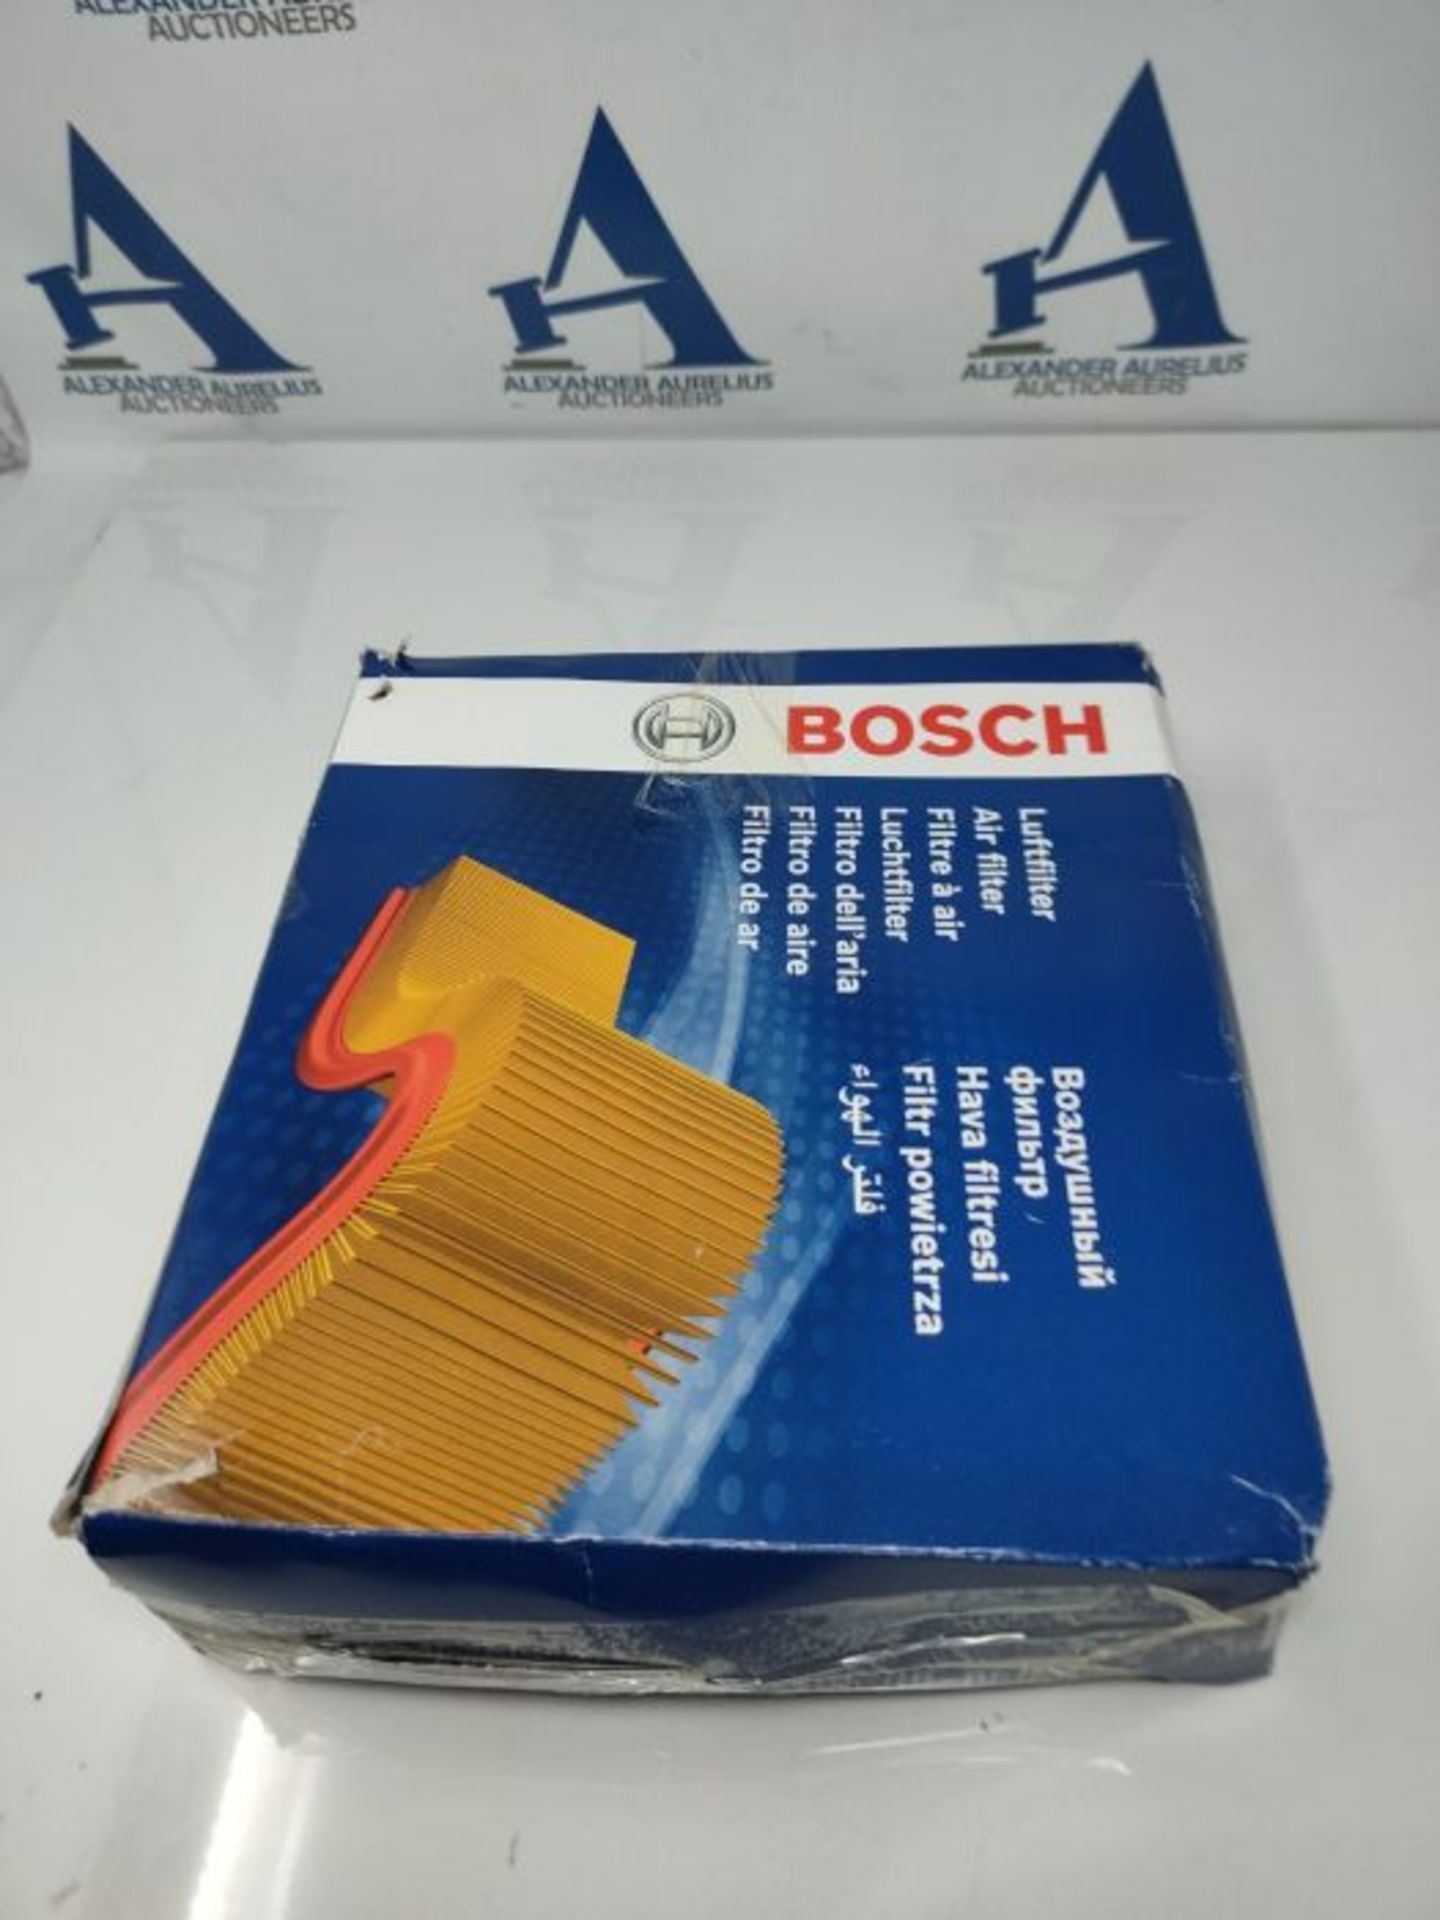 Bosch S0165 - Air Filter Car - Image 2 of 6